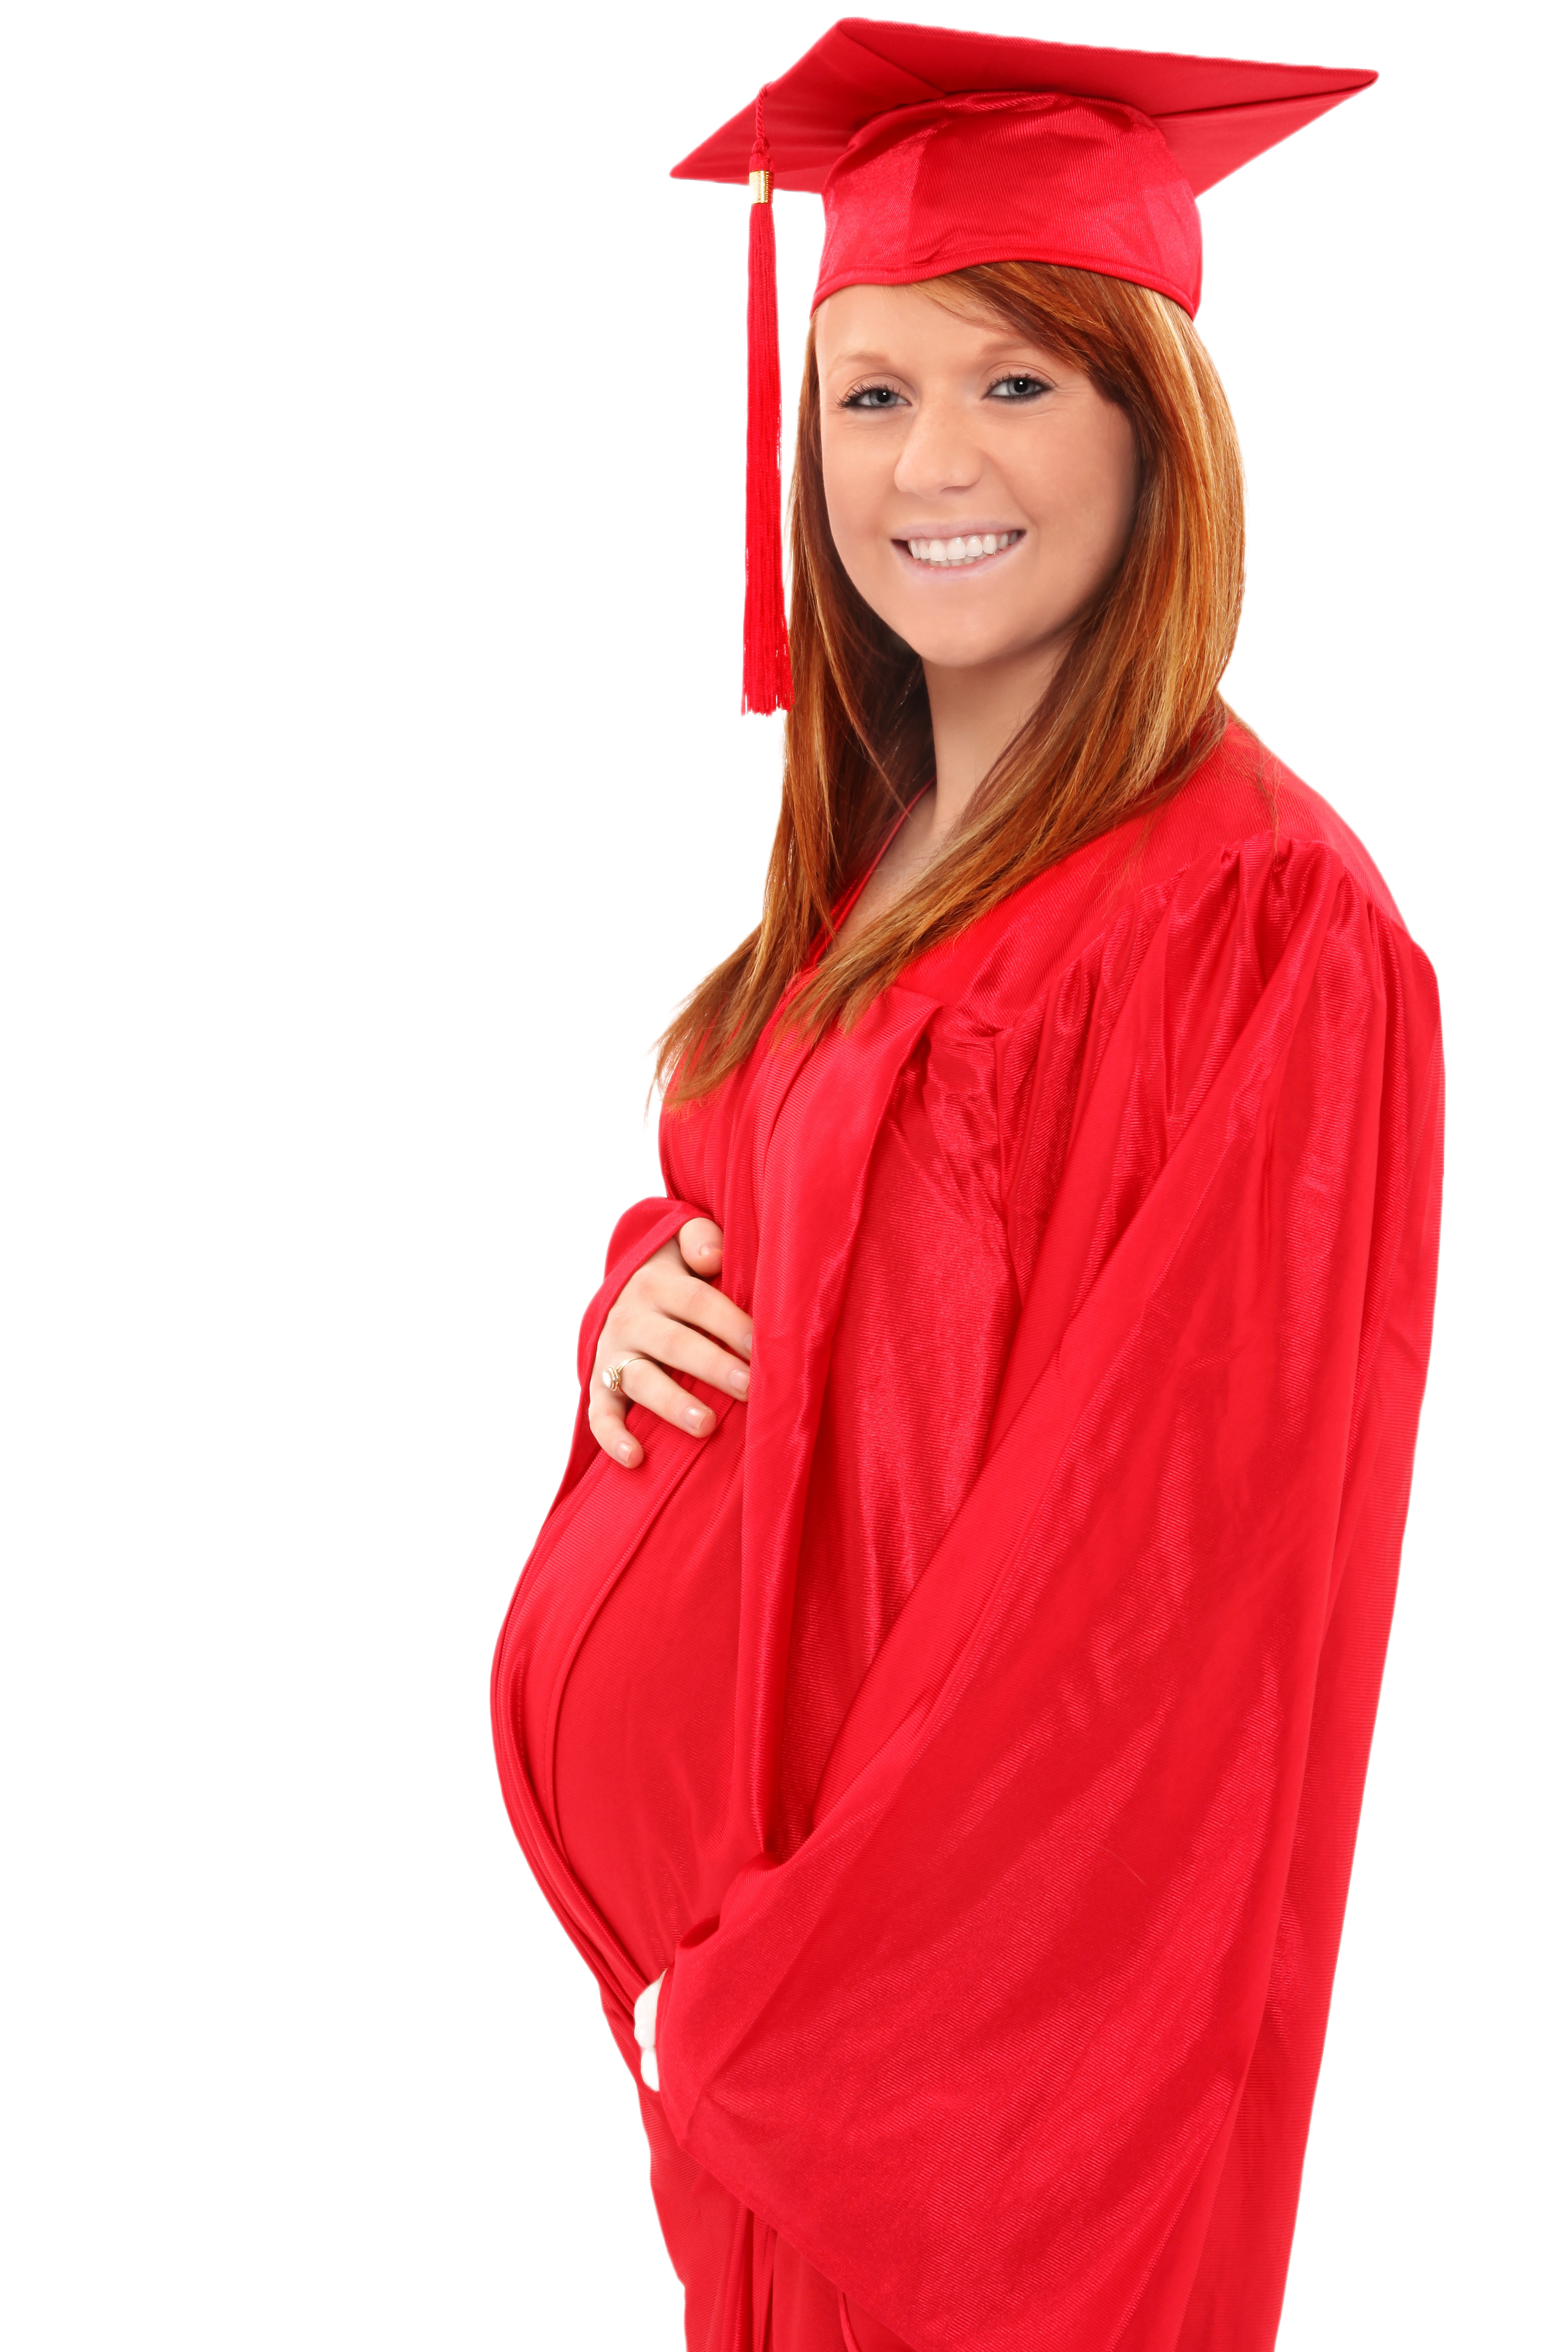  Happy expecting mother to be in graduation cap and gown over white background.